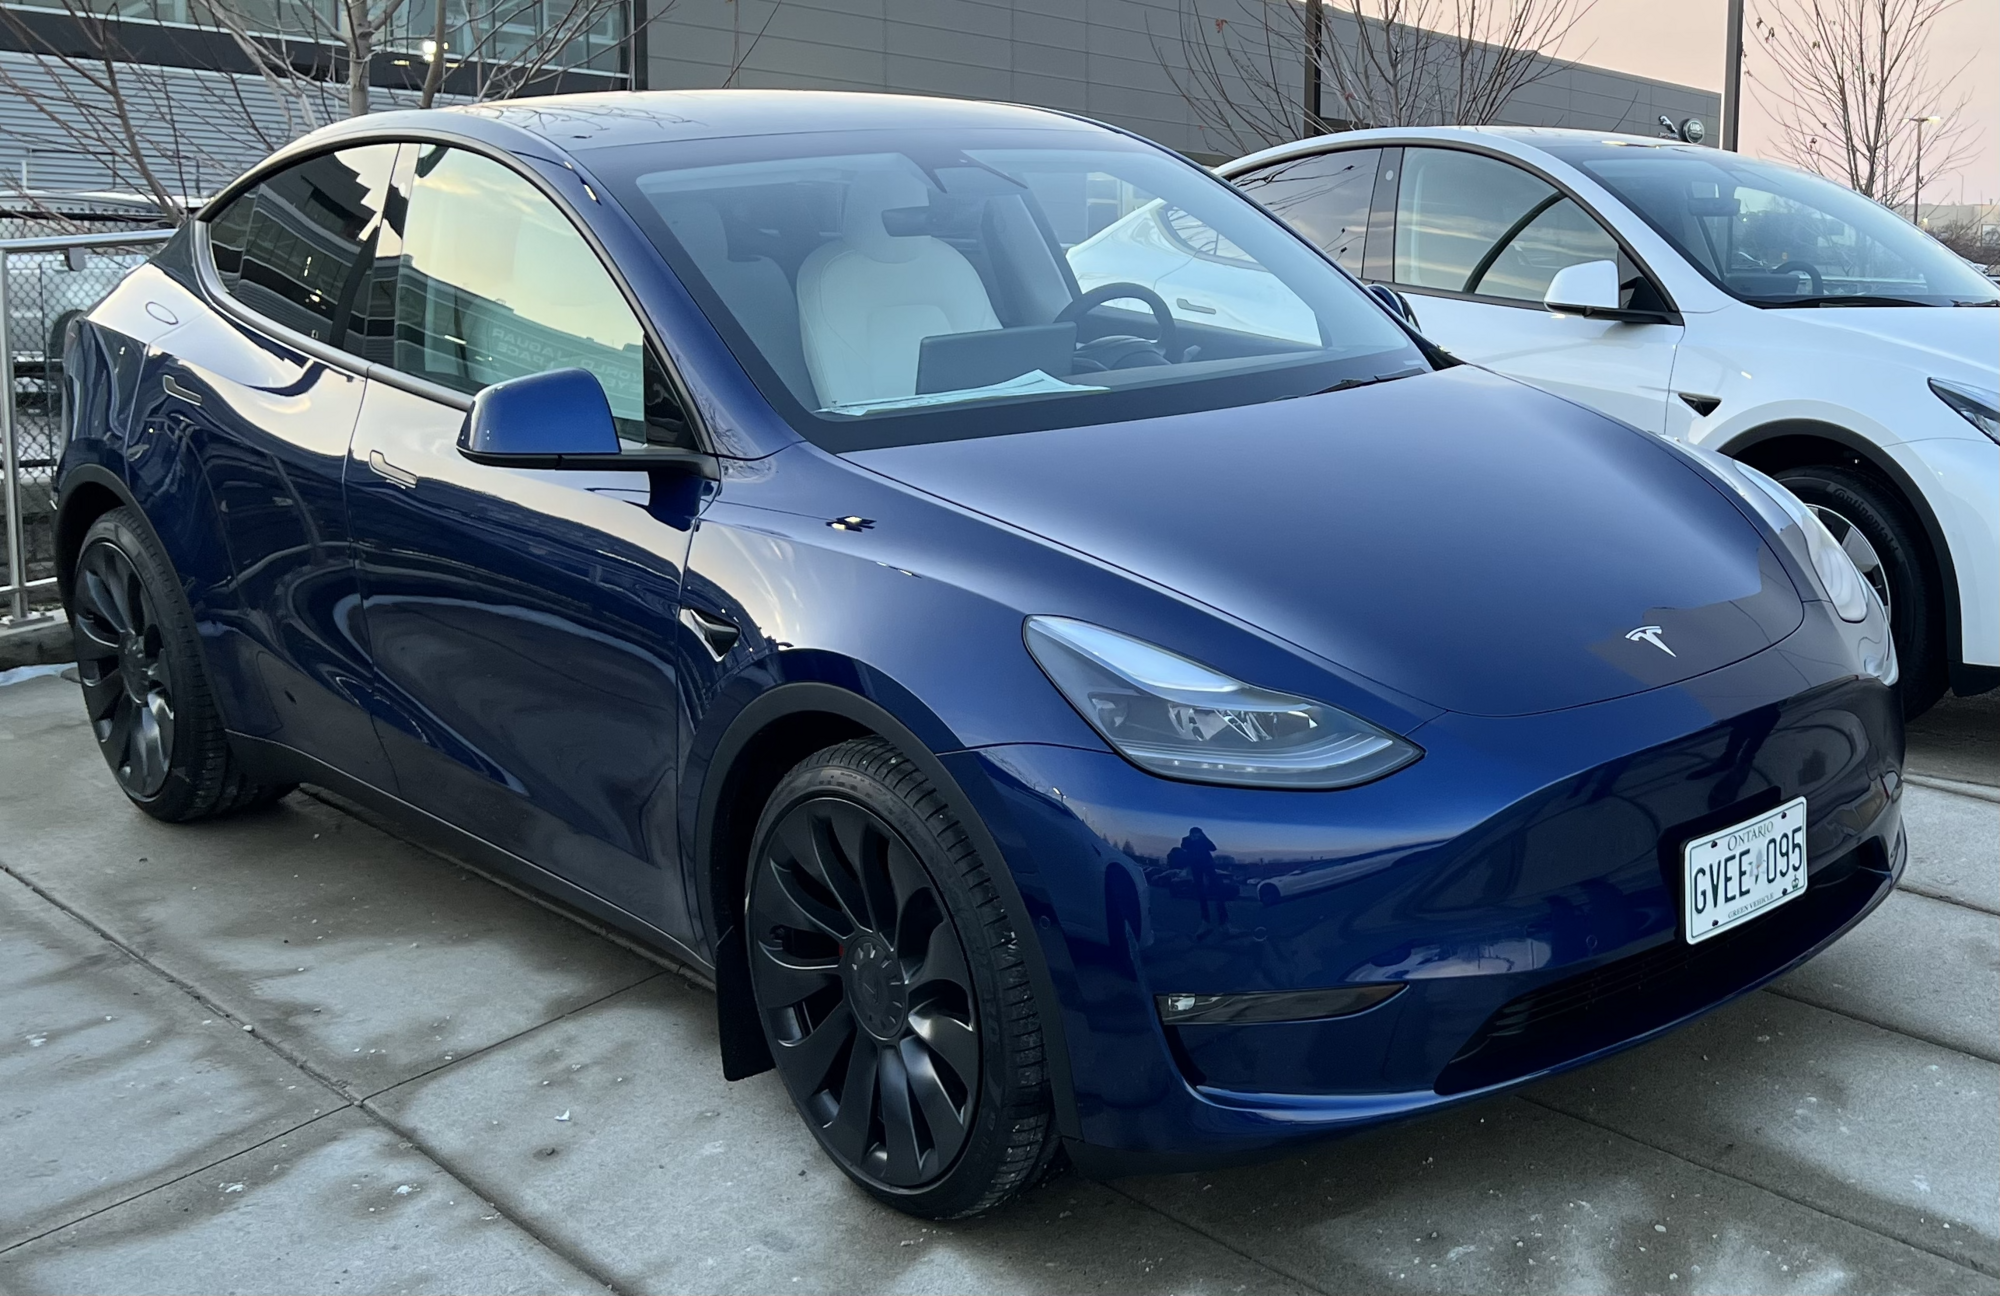 Some early Tesla Model 3 Highland owners aren't very happy with Tesla Vision